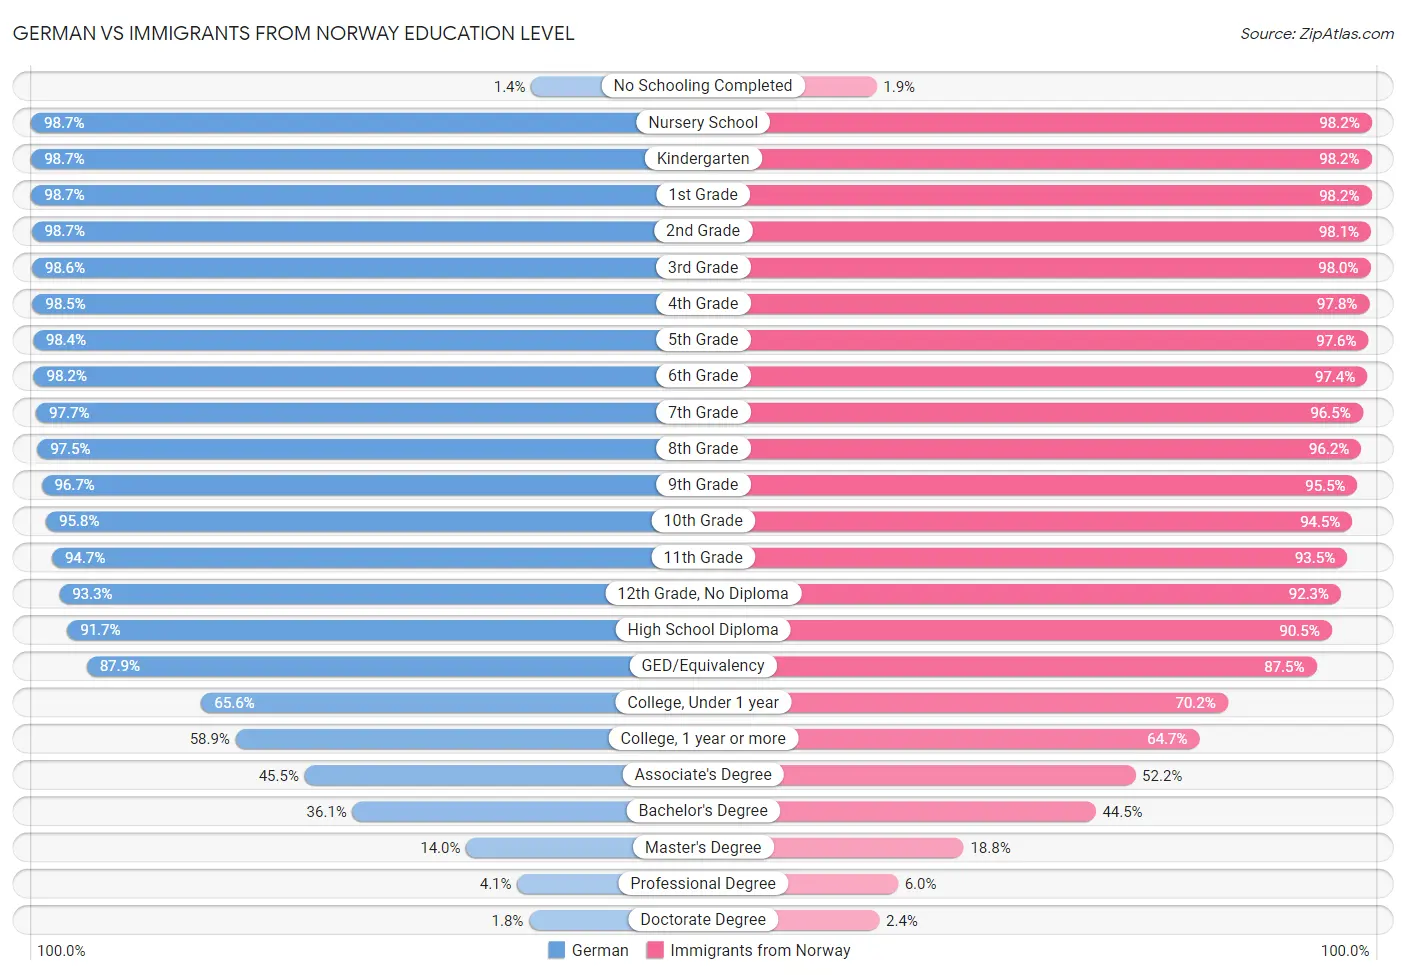 German vs Immigrants from Norway Education Level